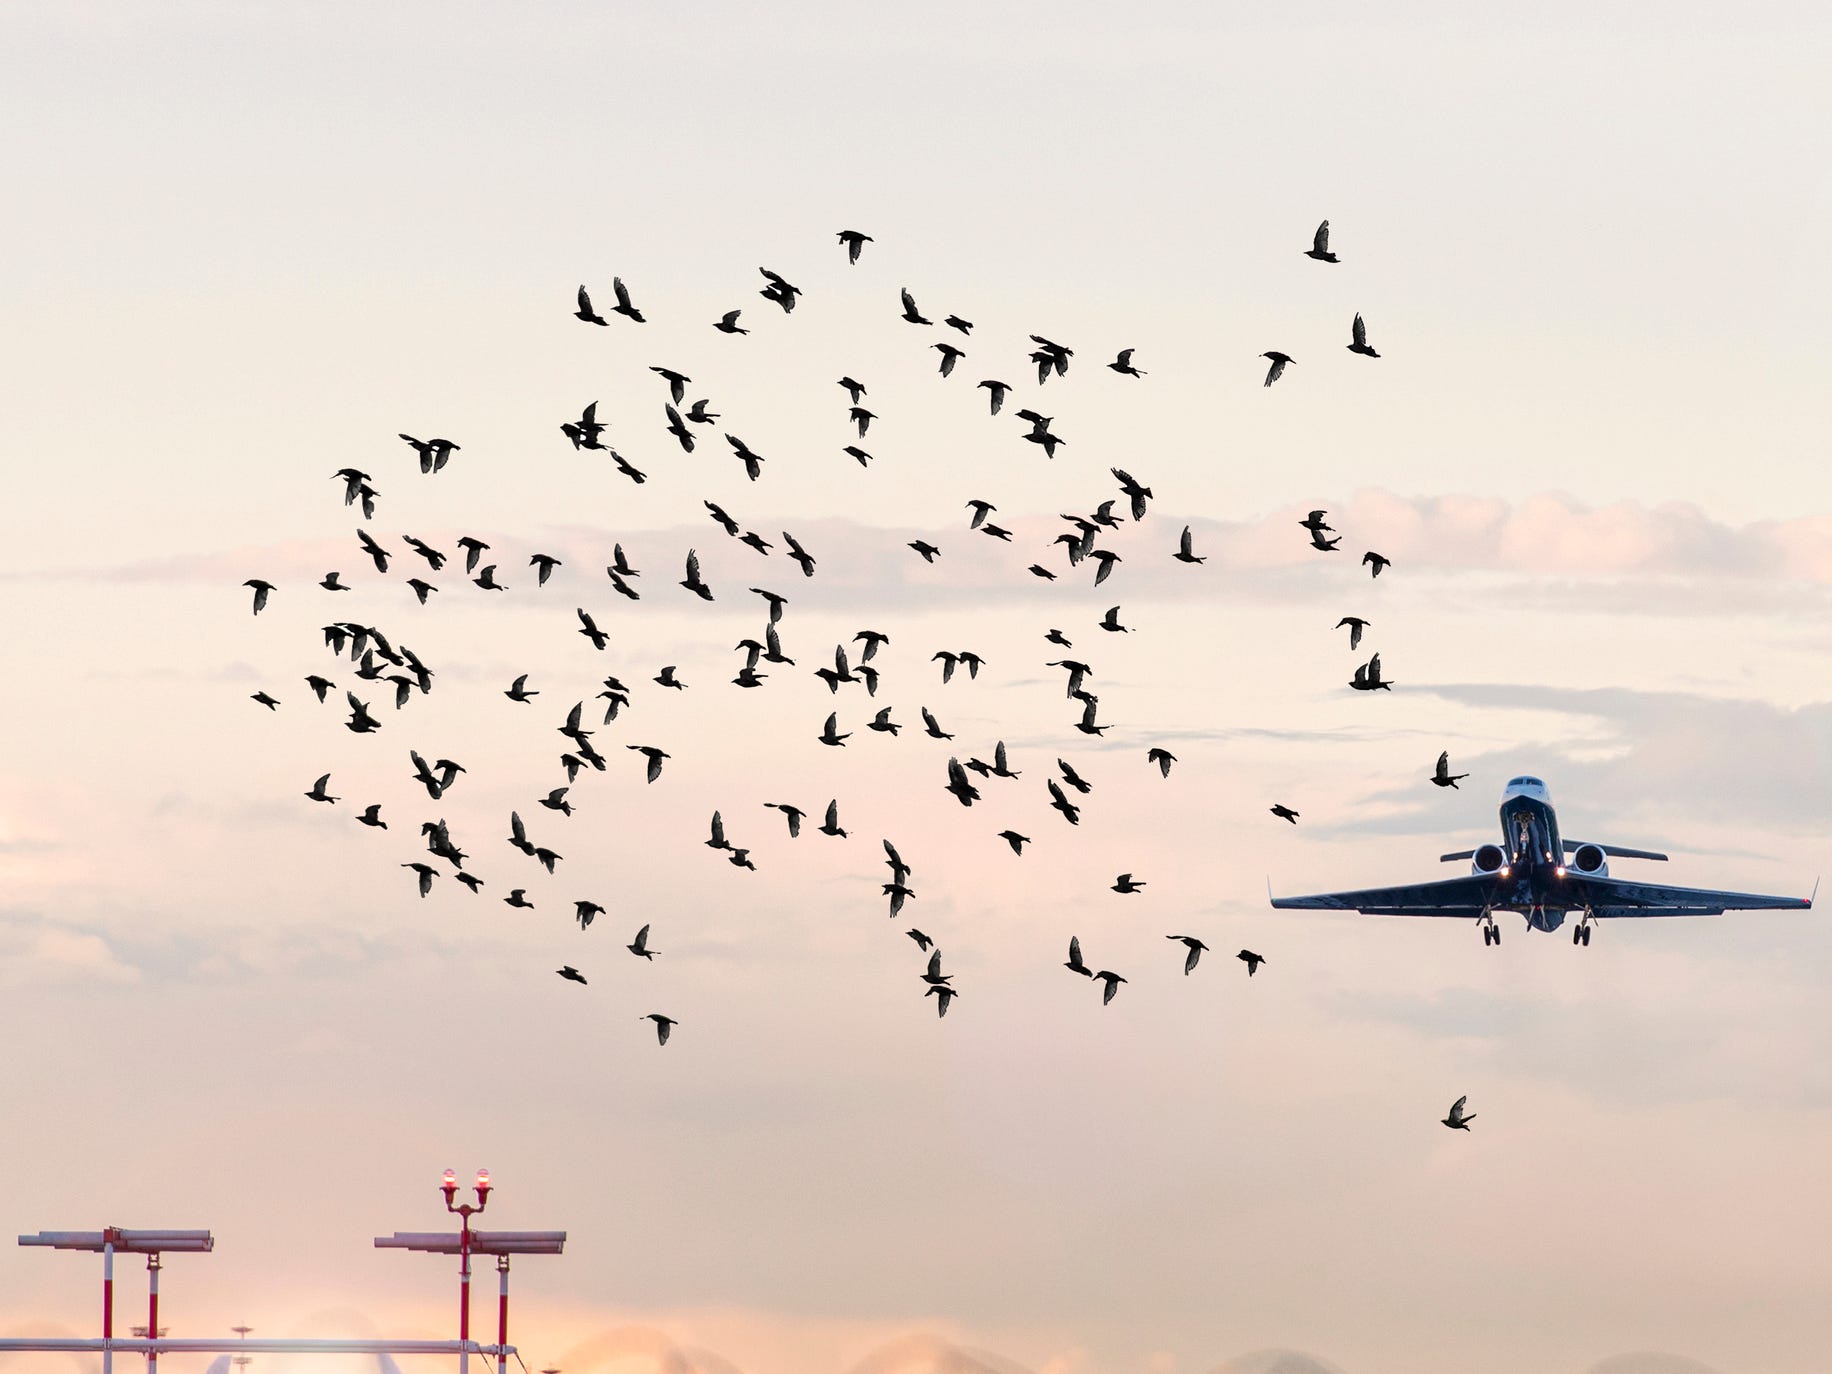 Flock of birds in front of airplane at airport.